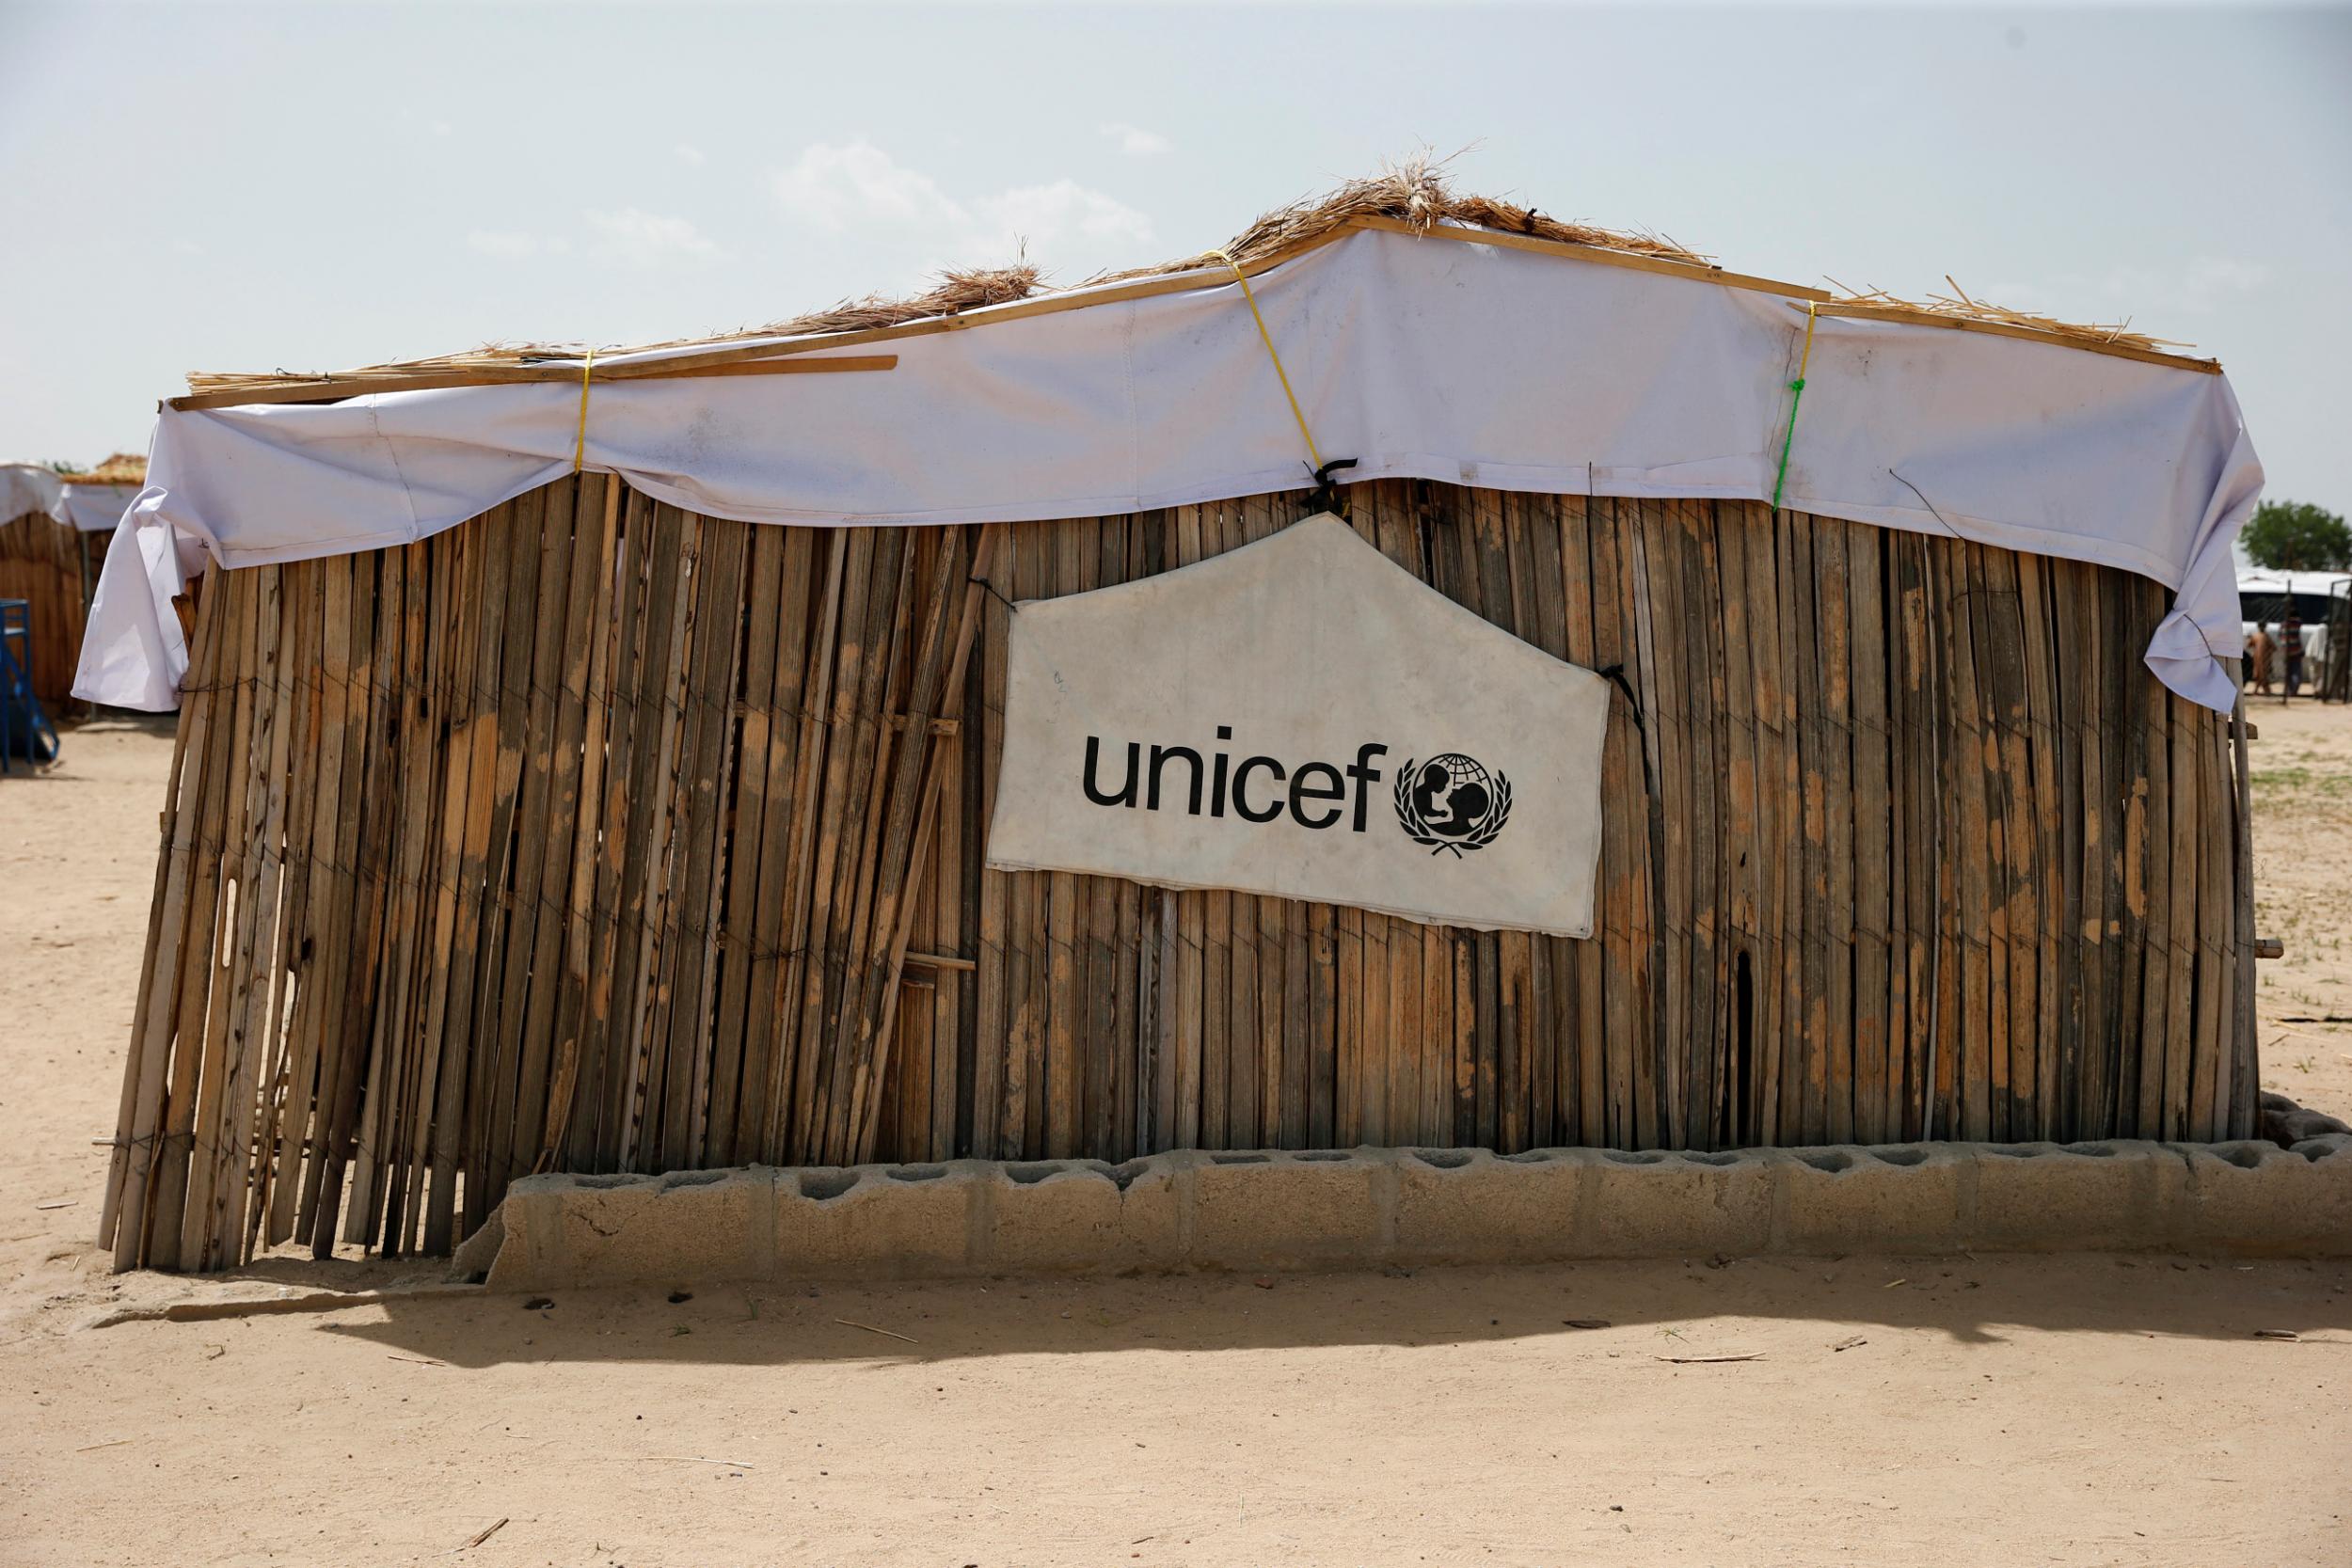 Cryptocurrency mining is an increasingly popular method to raise funds, with Unicef using it to help child refugees in Myanmar.